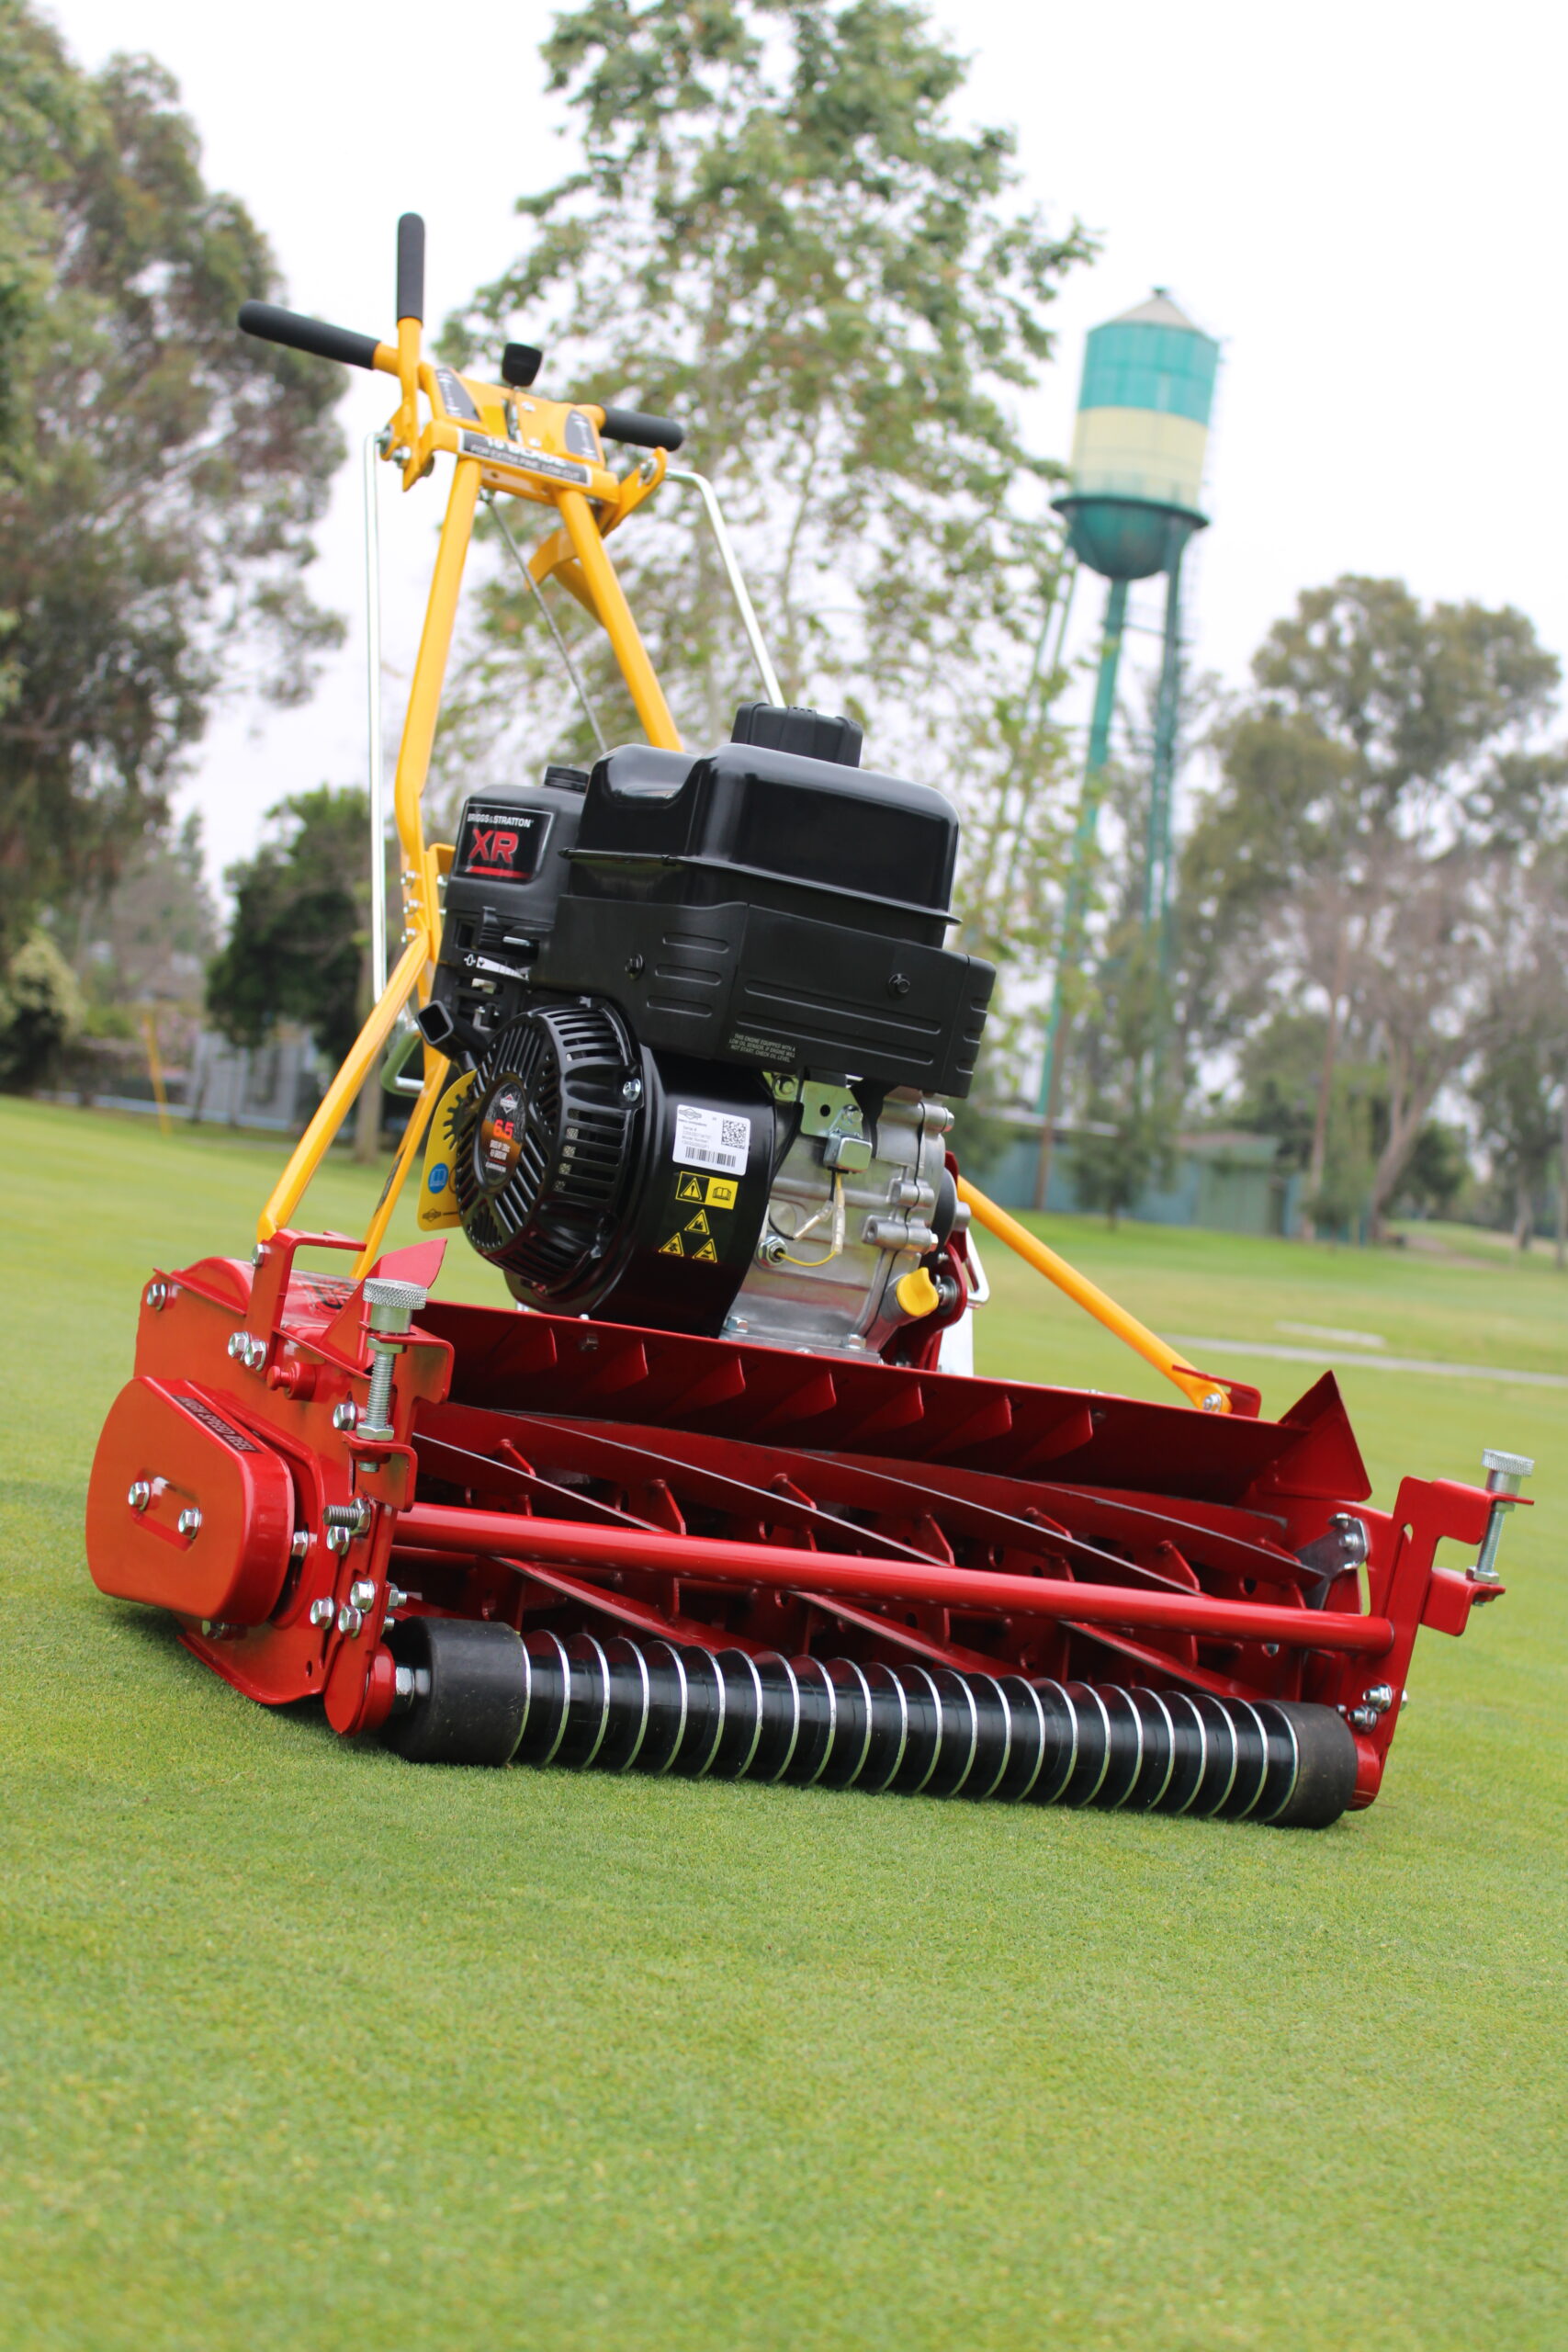 25 McLane10-Blade GreensKeeper designed for Putting Greens (cuts 1/8 to  3/4) (B&S XR Engine)